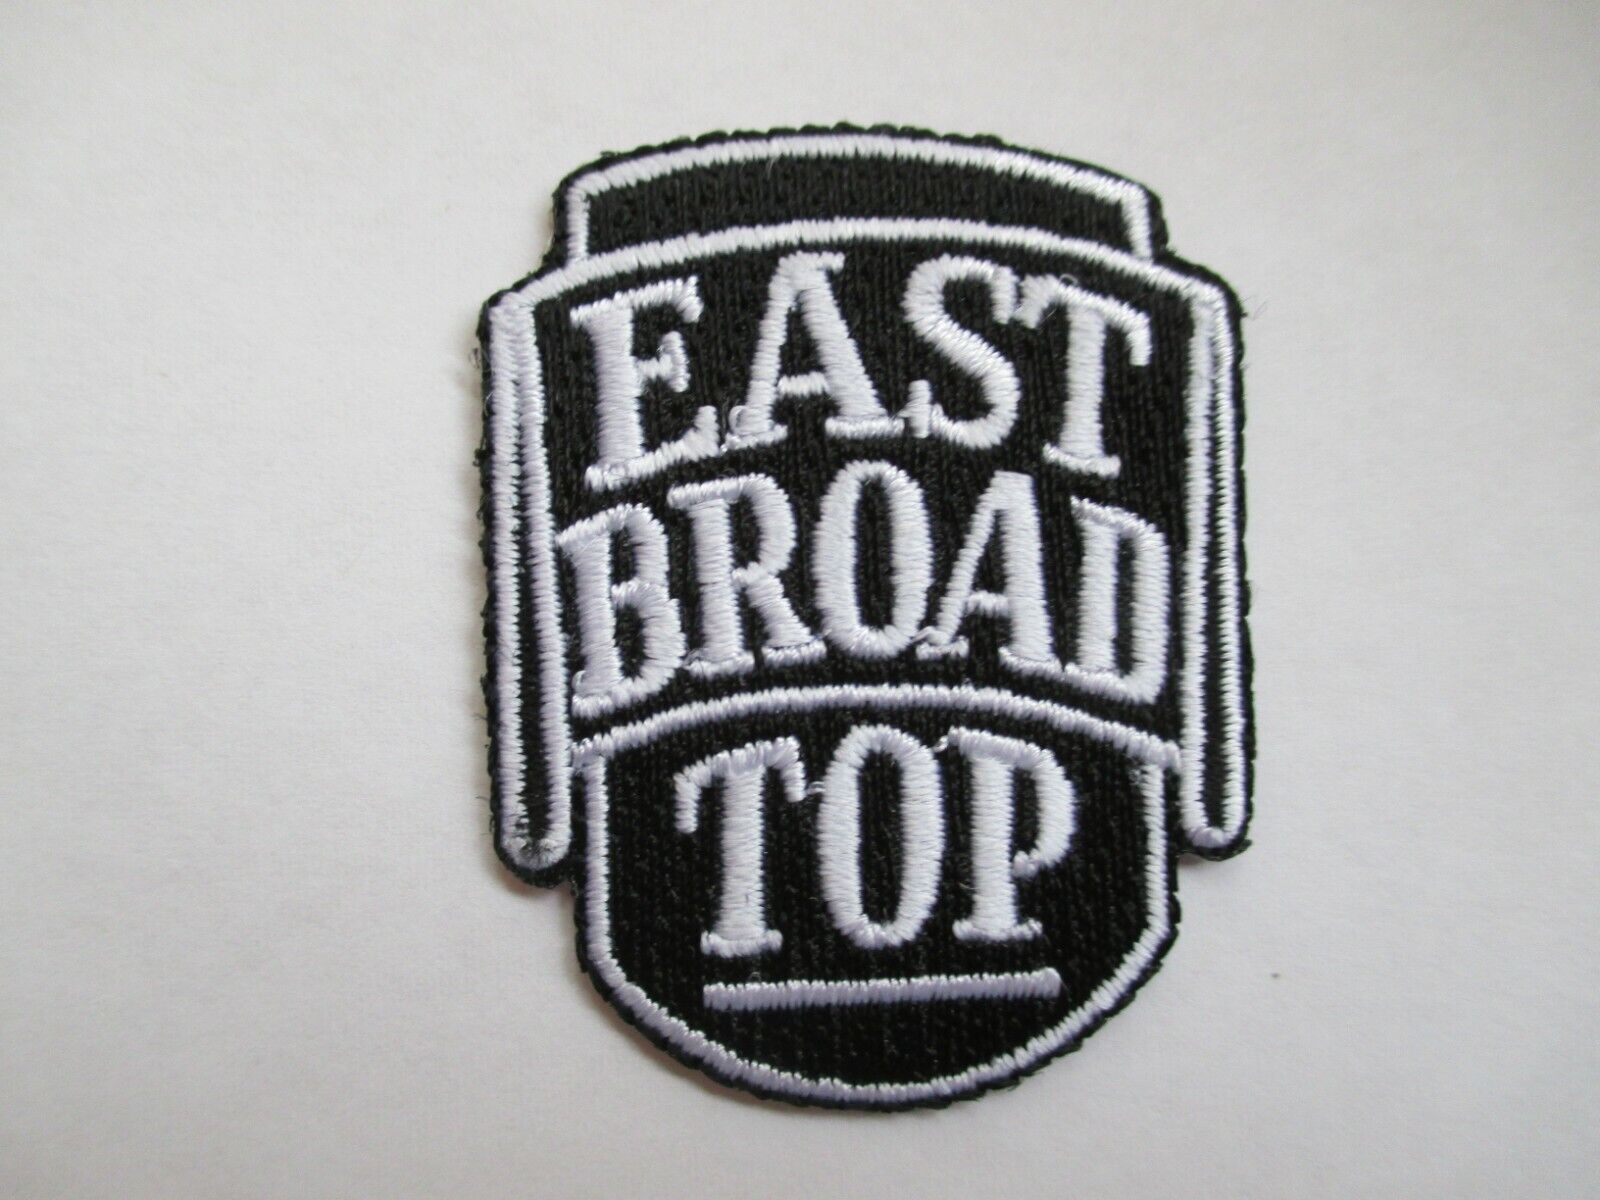 EAST BROAD TOP Railroad and COAL COMPANY Patch IRON ON